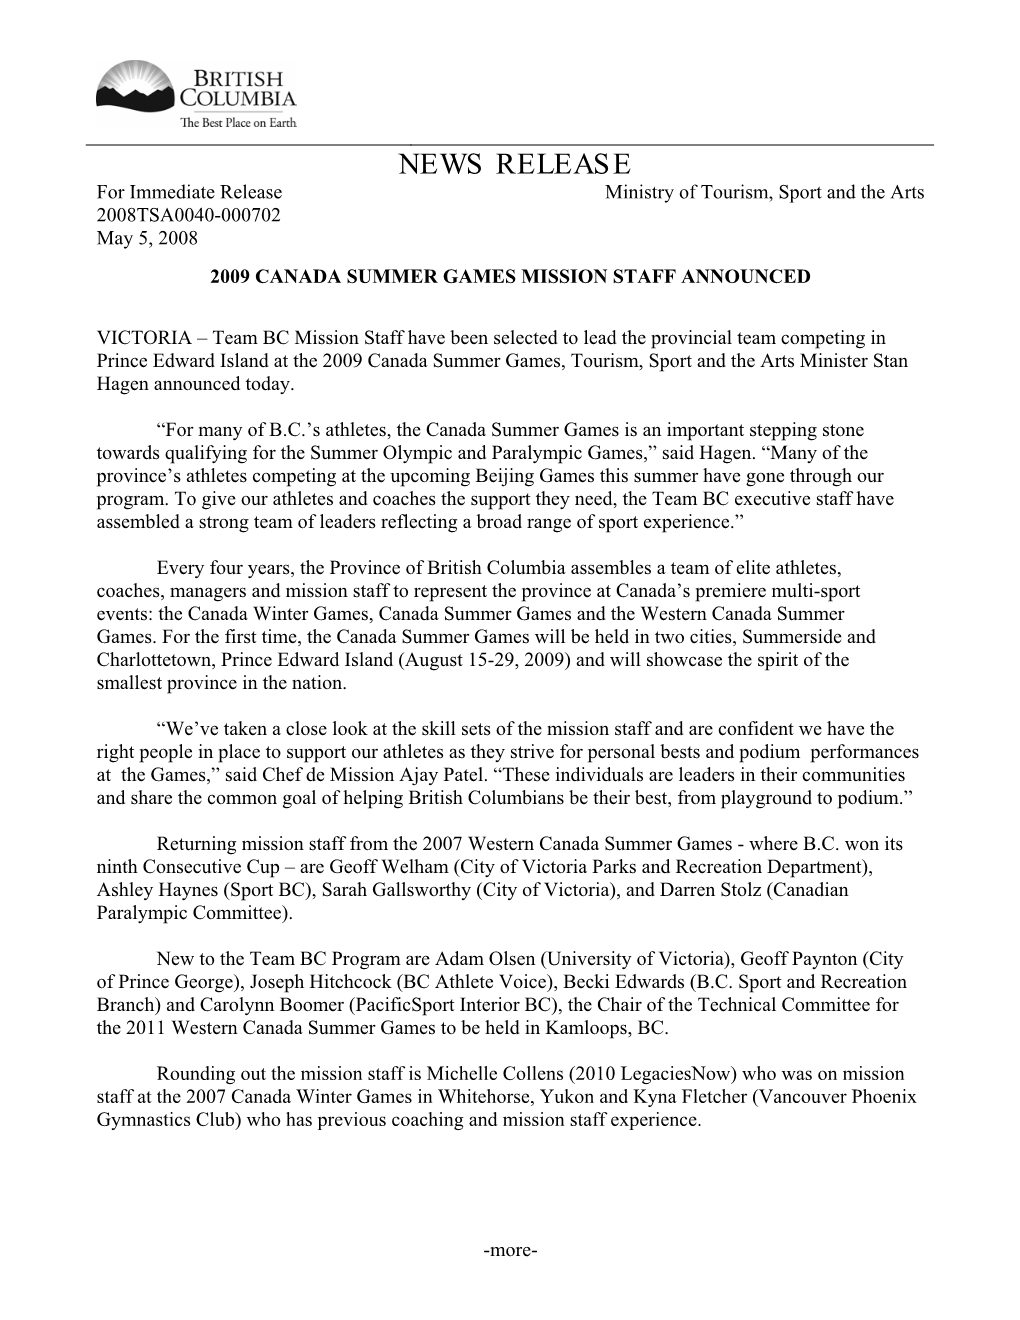 NEWS RELEASE for Immediate Release Ministry of Tourism, Sport and the Arts 2008TSA0040-000702 May 5, 2008